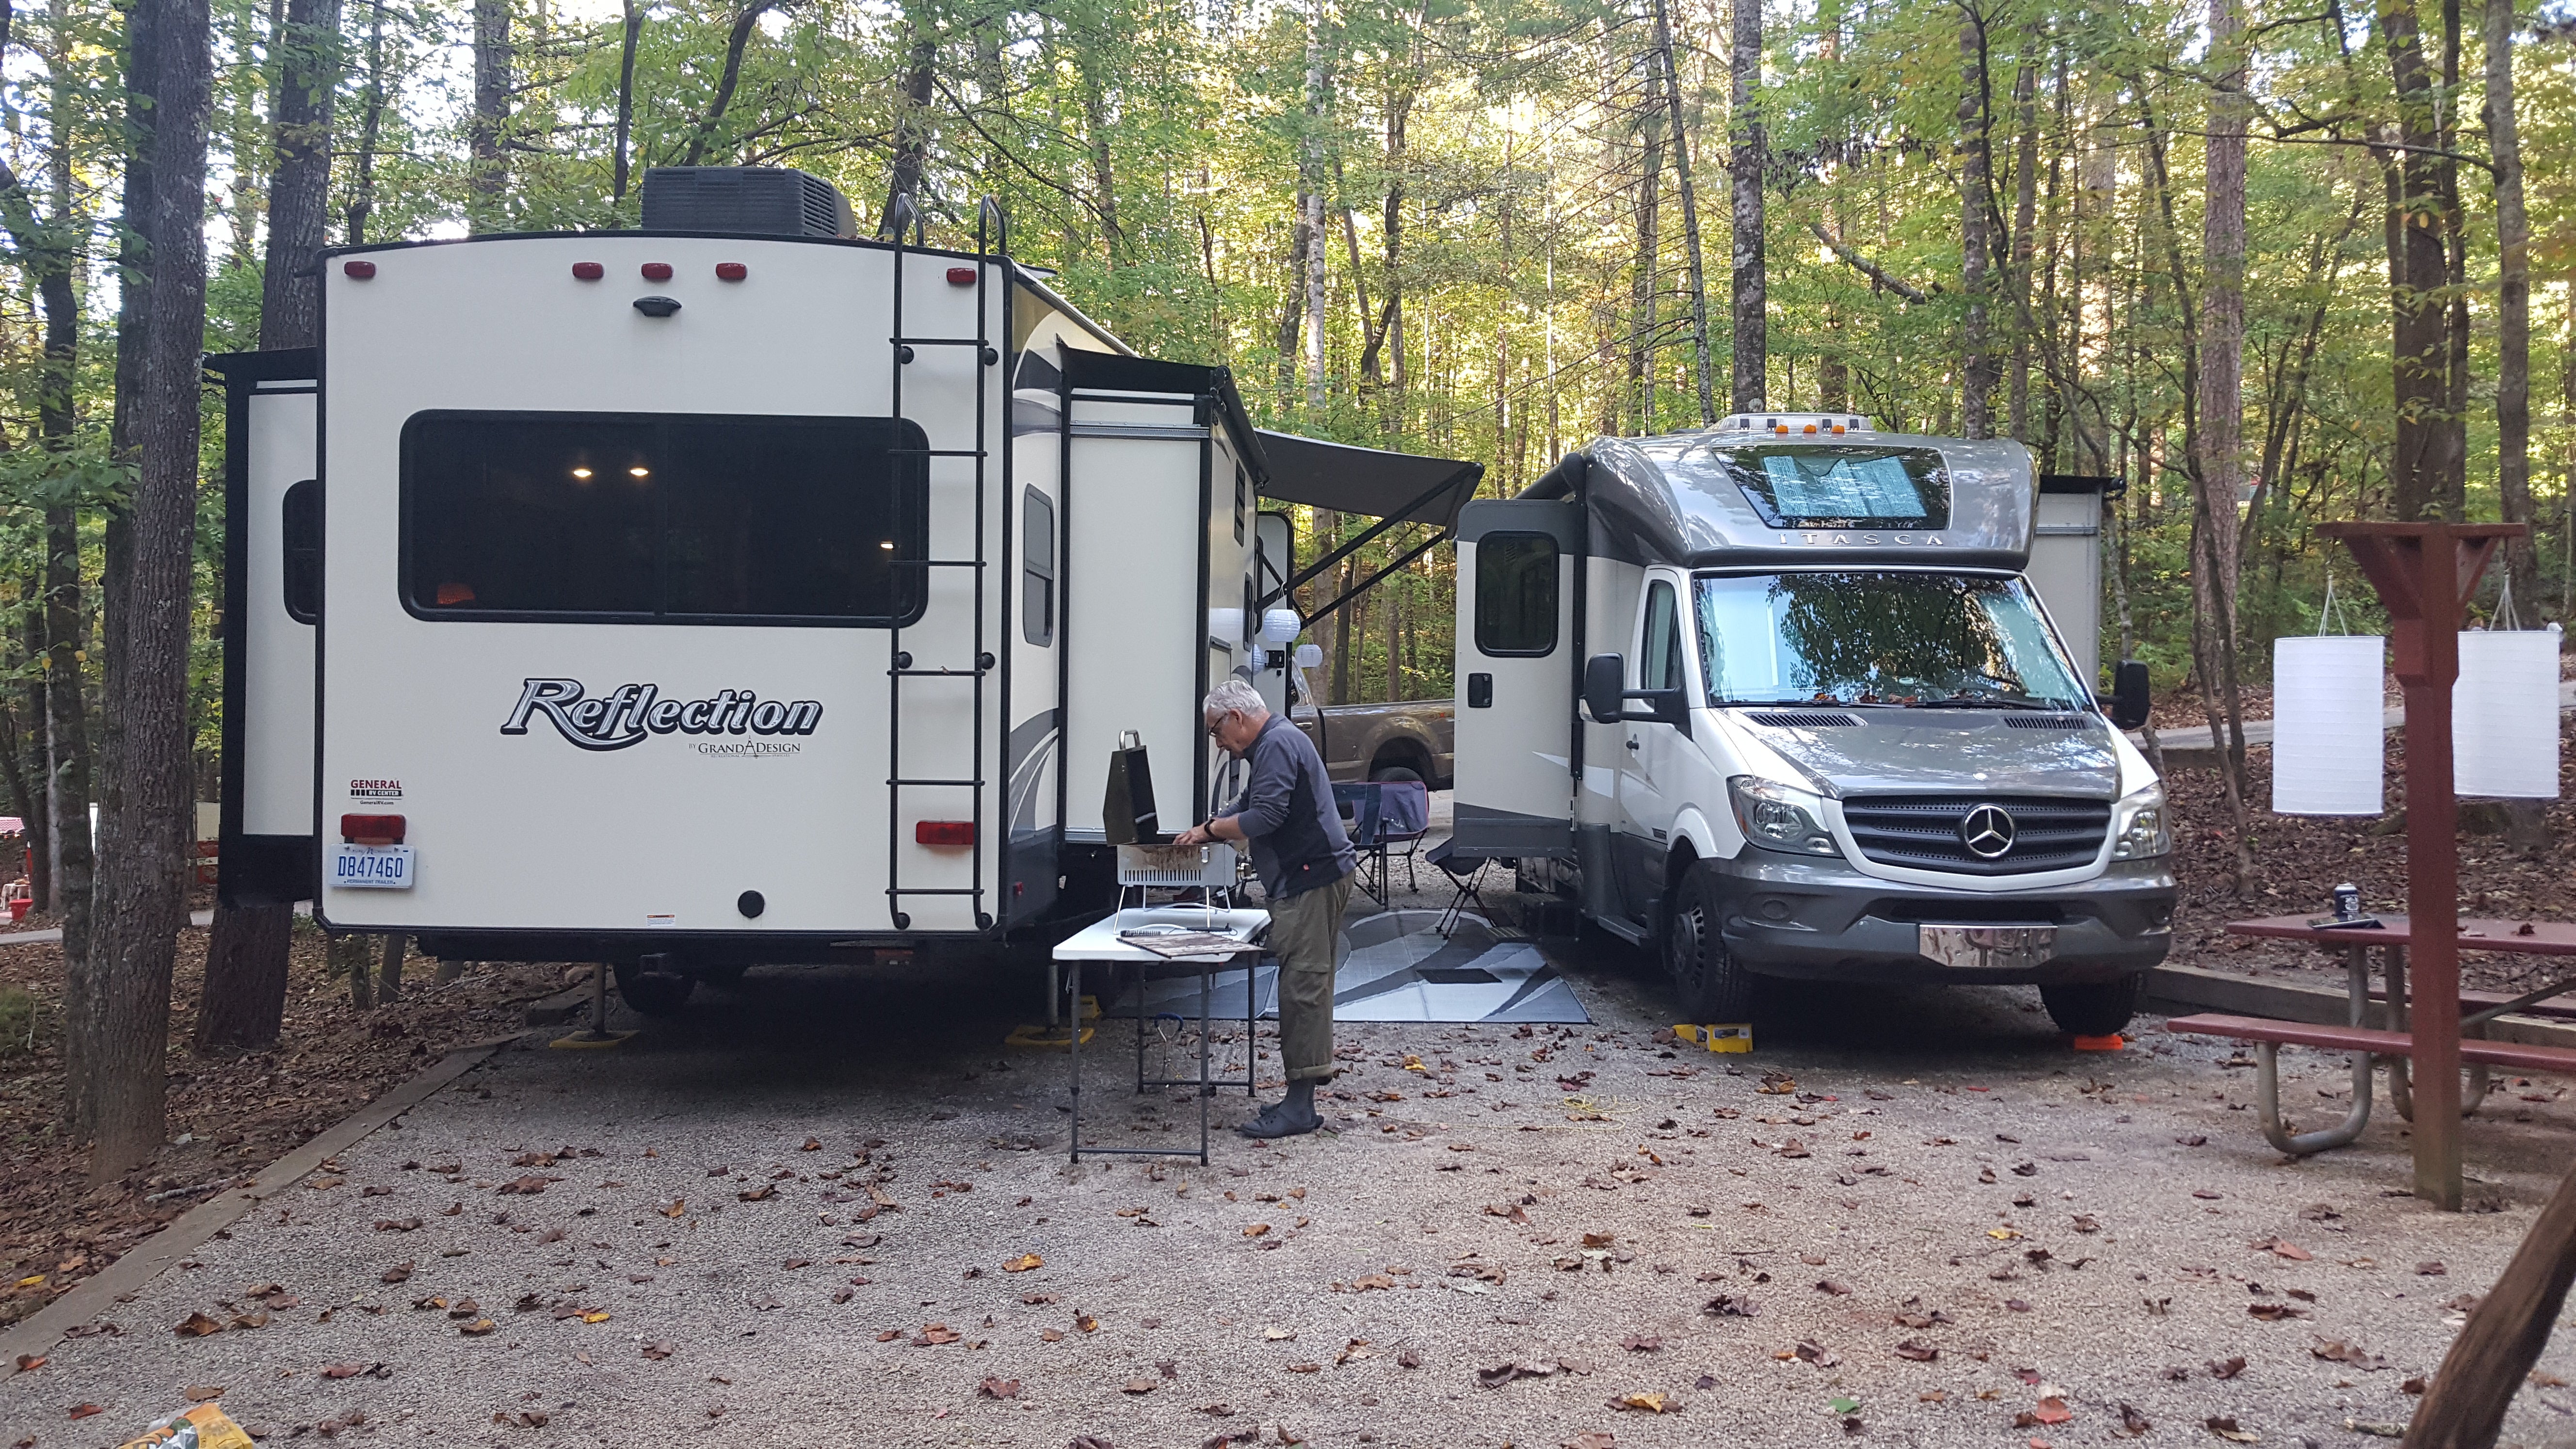 We shared a "buddy" RV site with friends. 